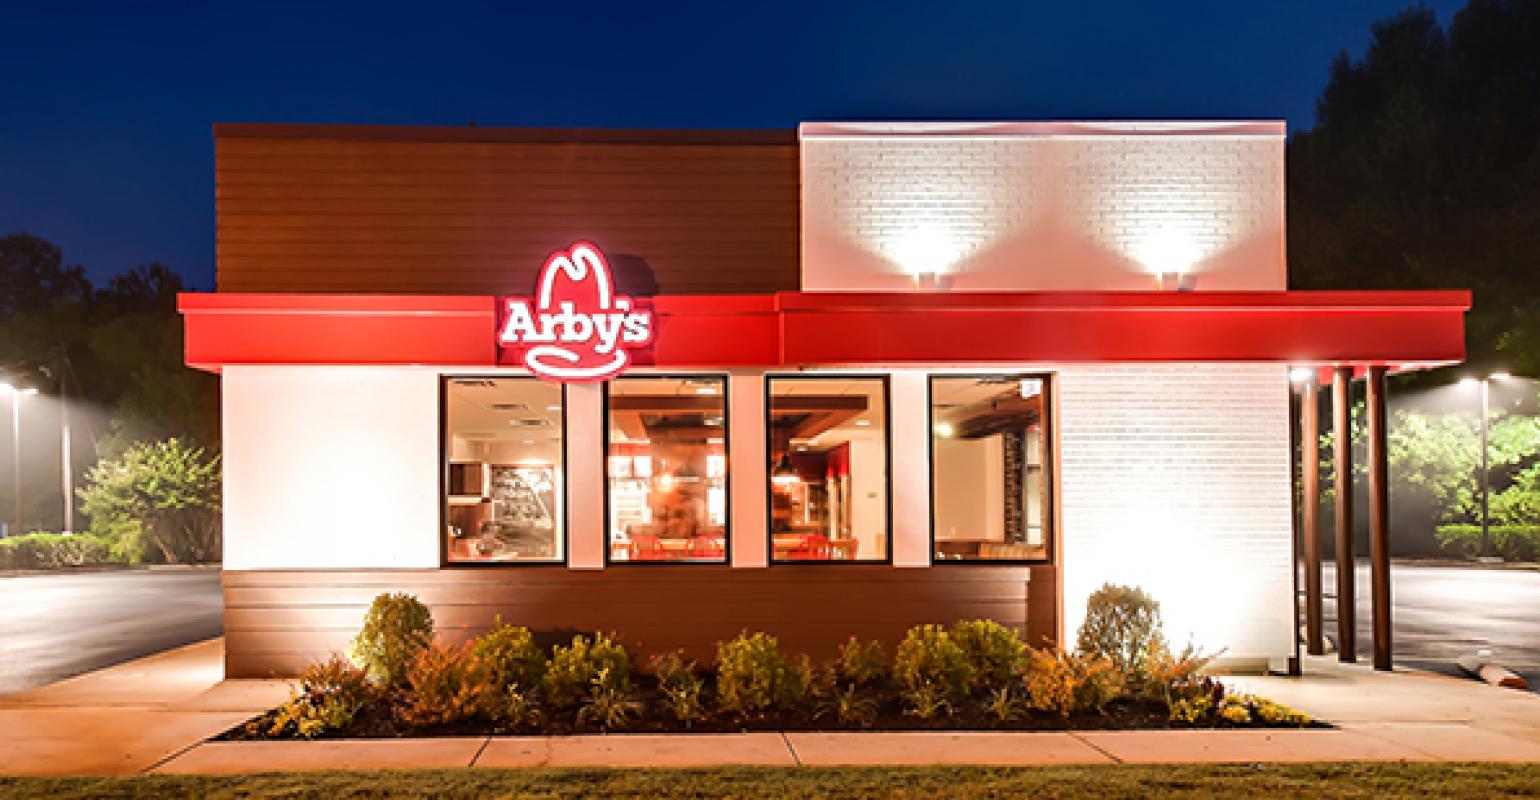 Arbys menu prices featuring 98 items ranging from $0.59 to $7.69